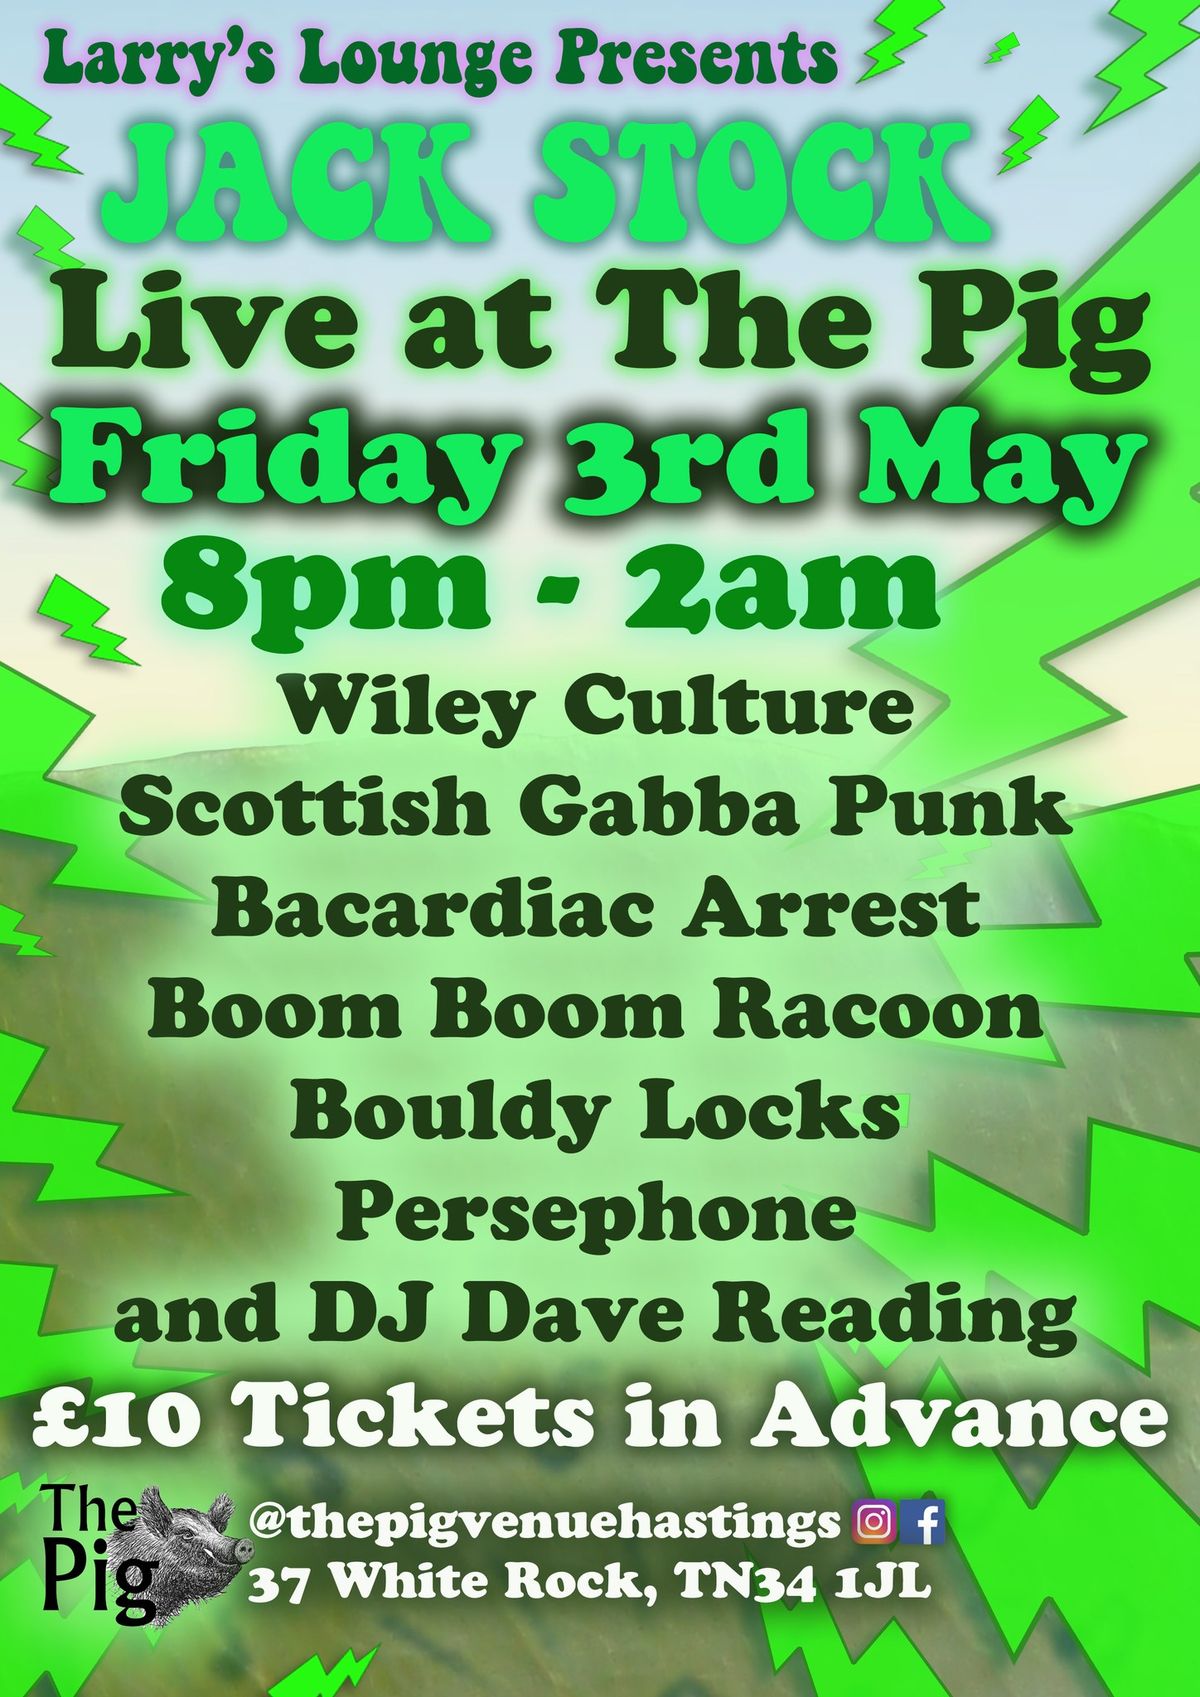 Larrys Lounge presents - Jack Stock - Live at the Pig